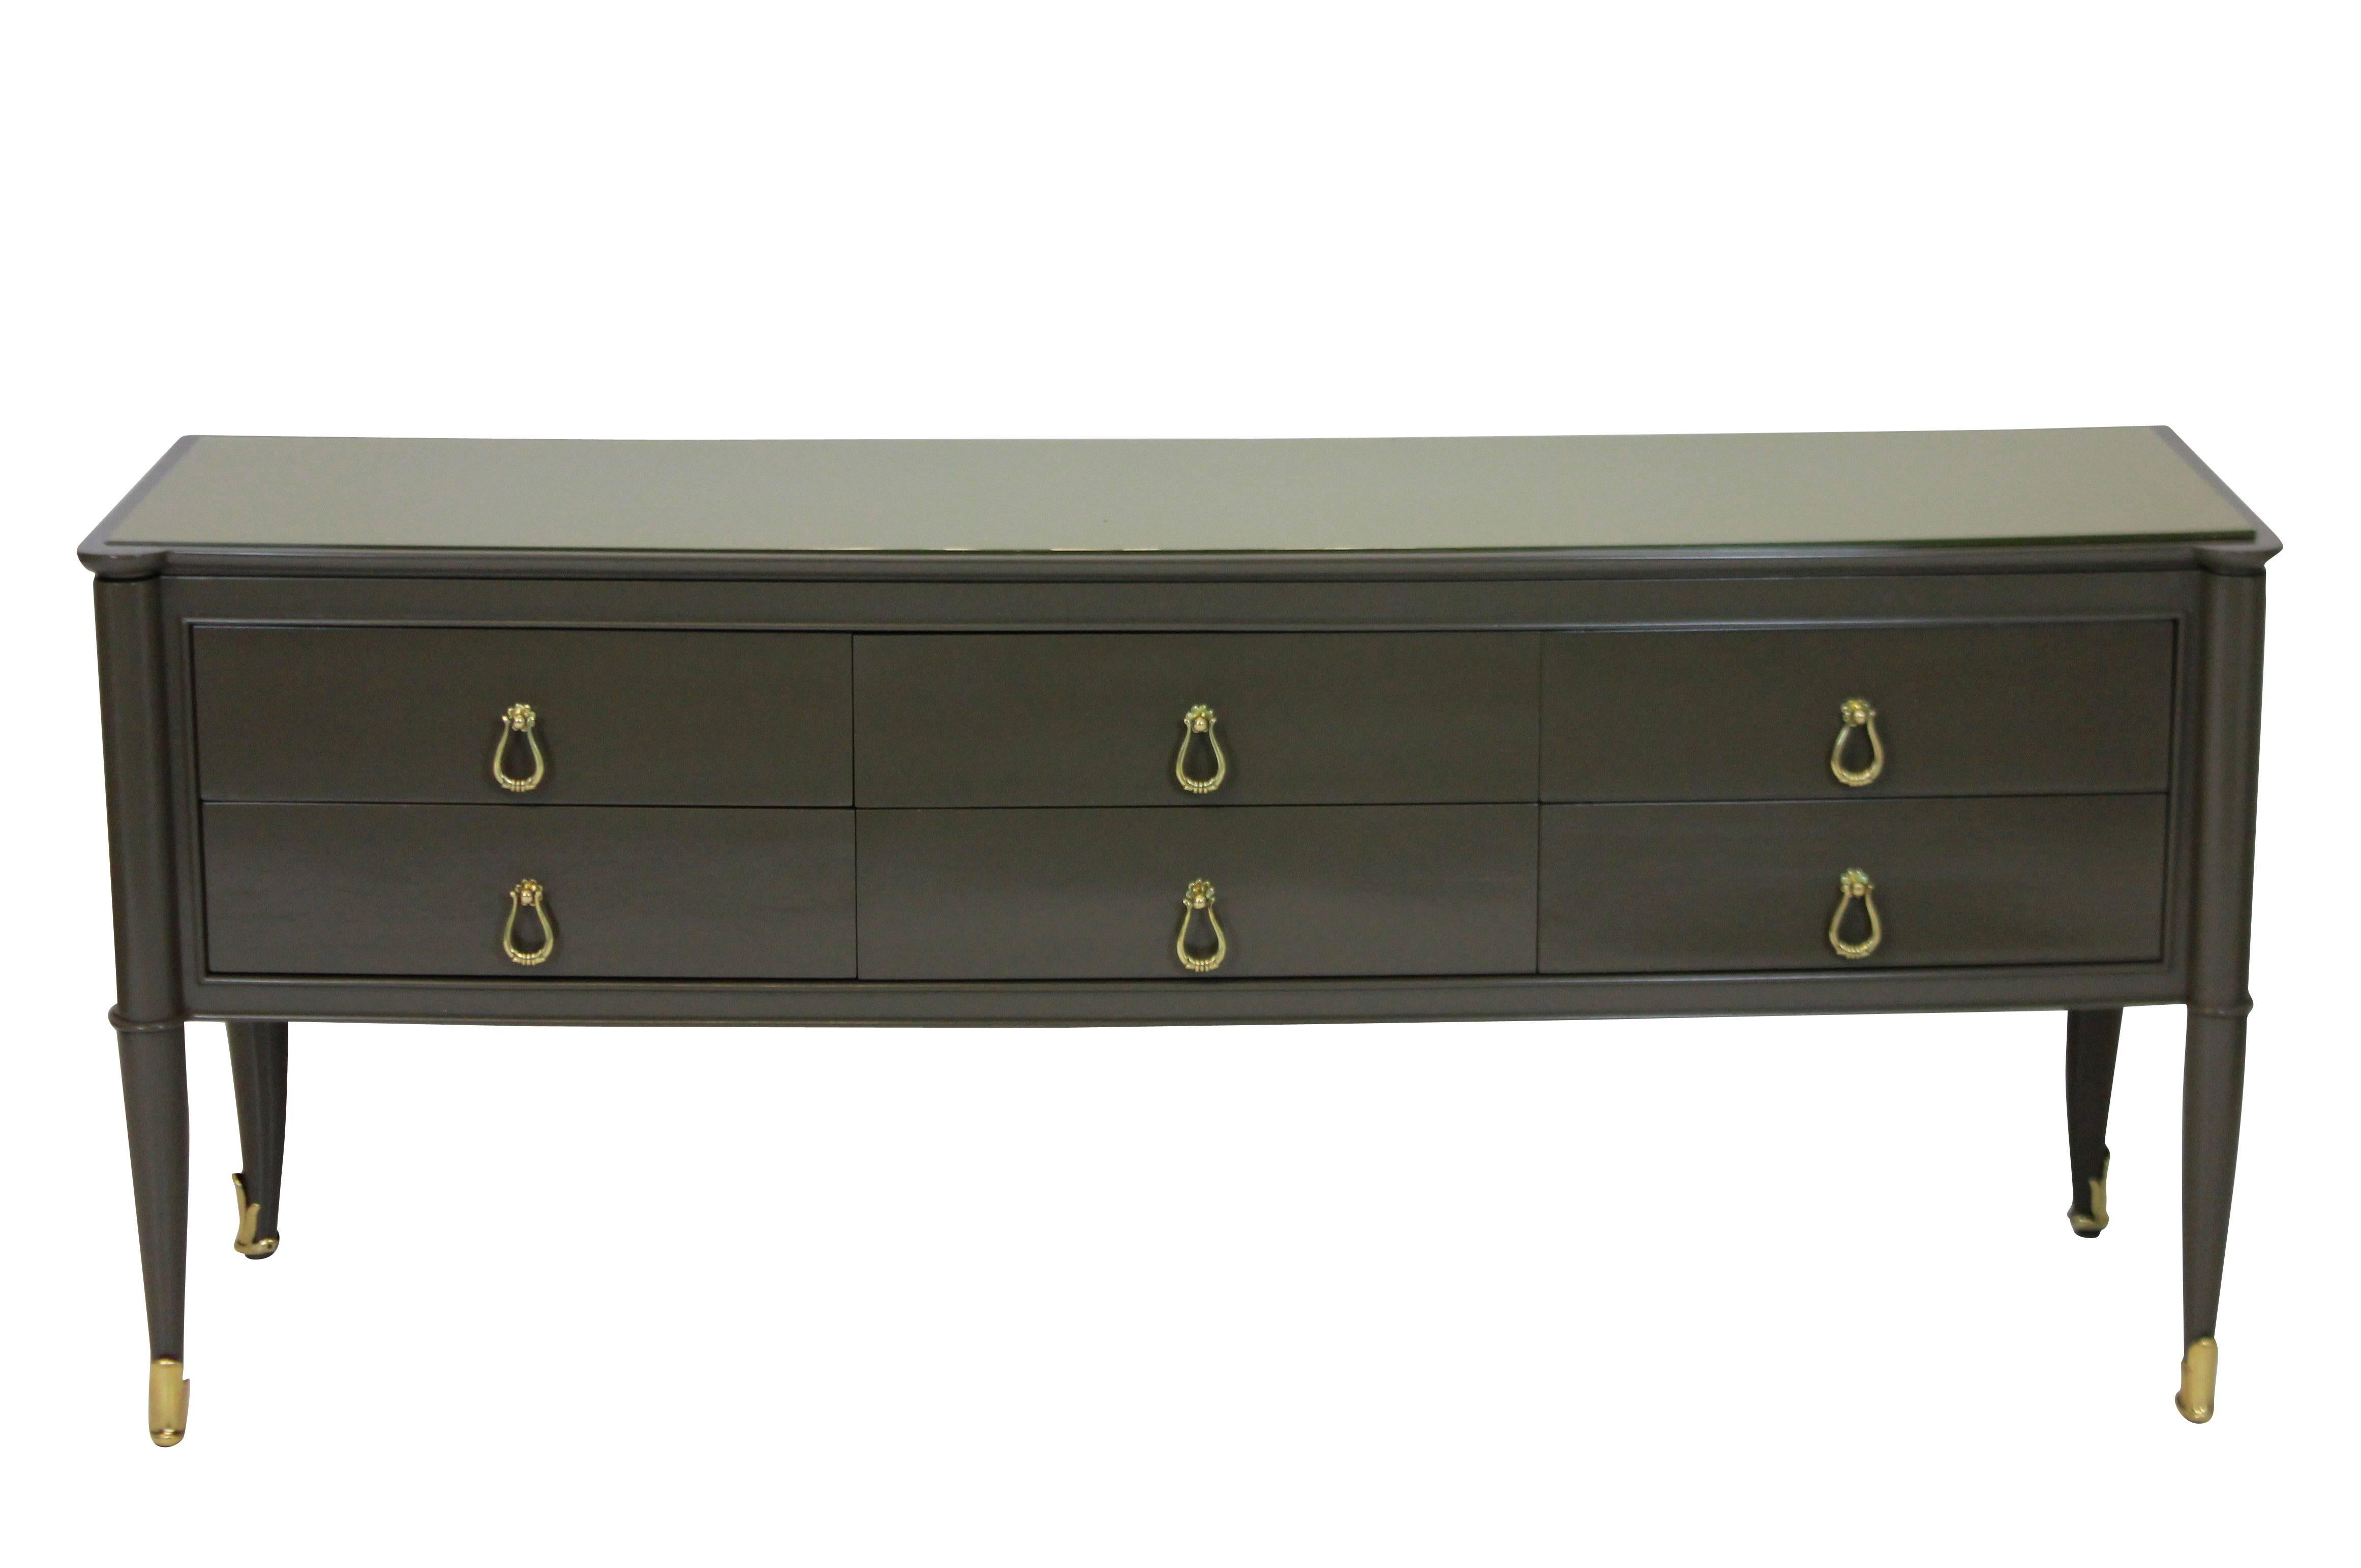 A stylish Italian six-drawer credenza in an Armani grey lacquer, with a golden colored glass top and brass fittings and sabot.
  